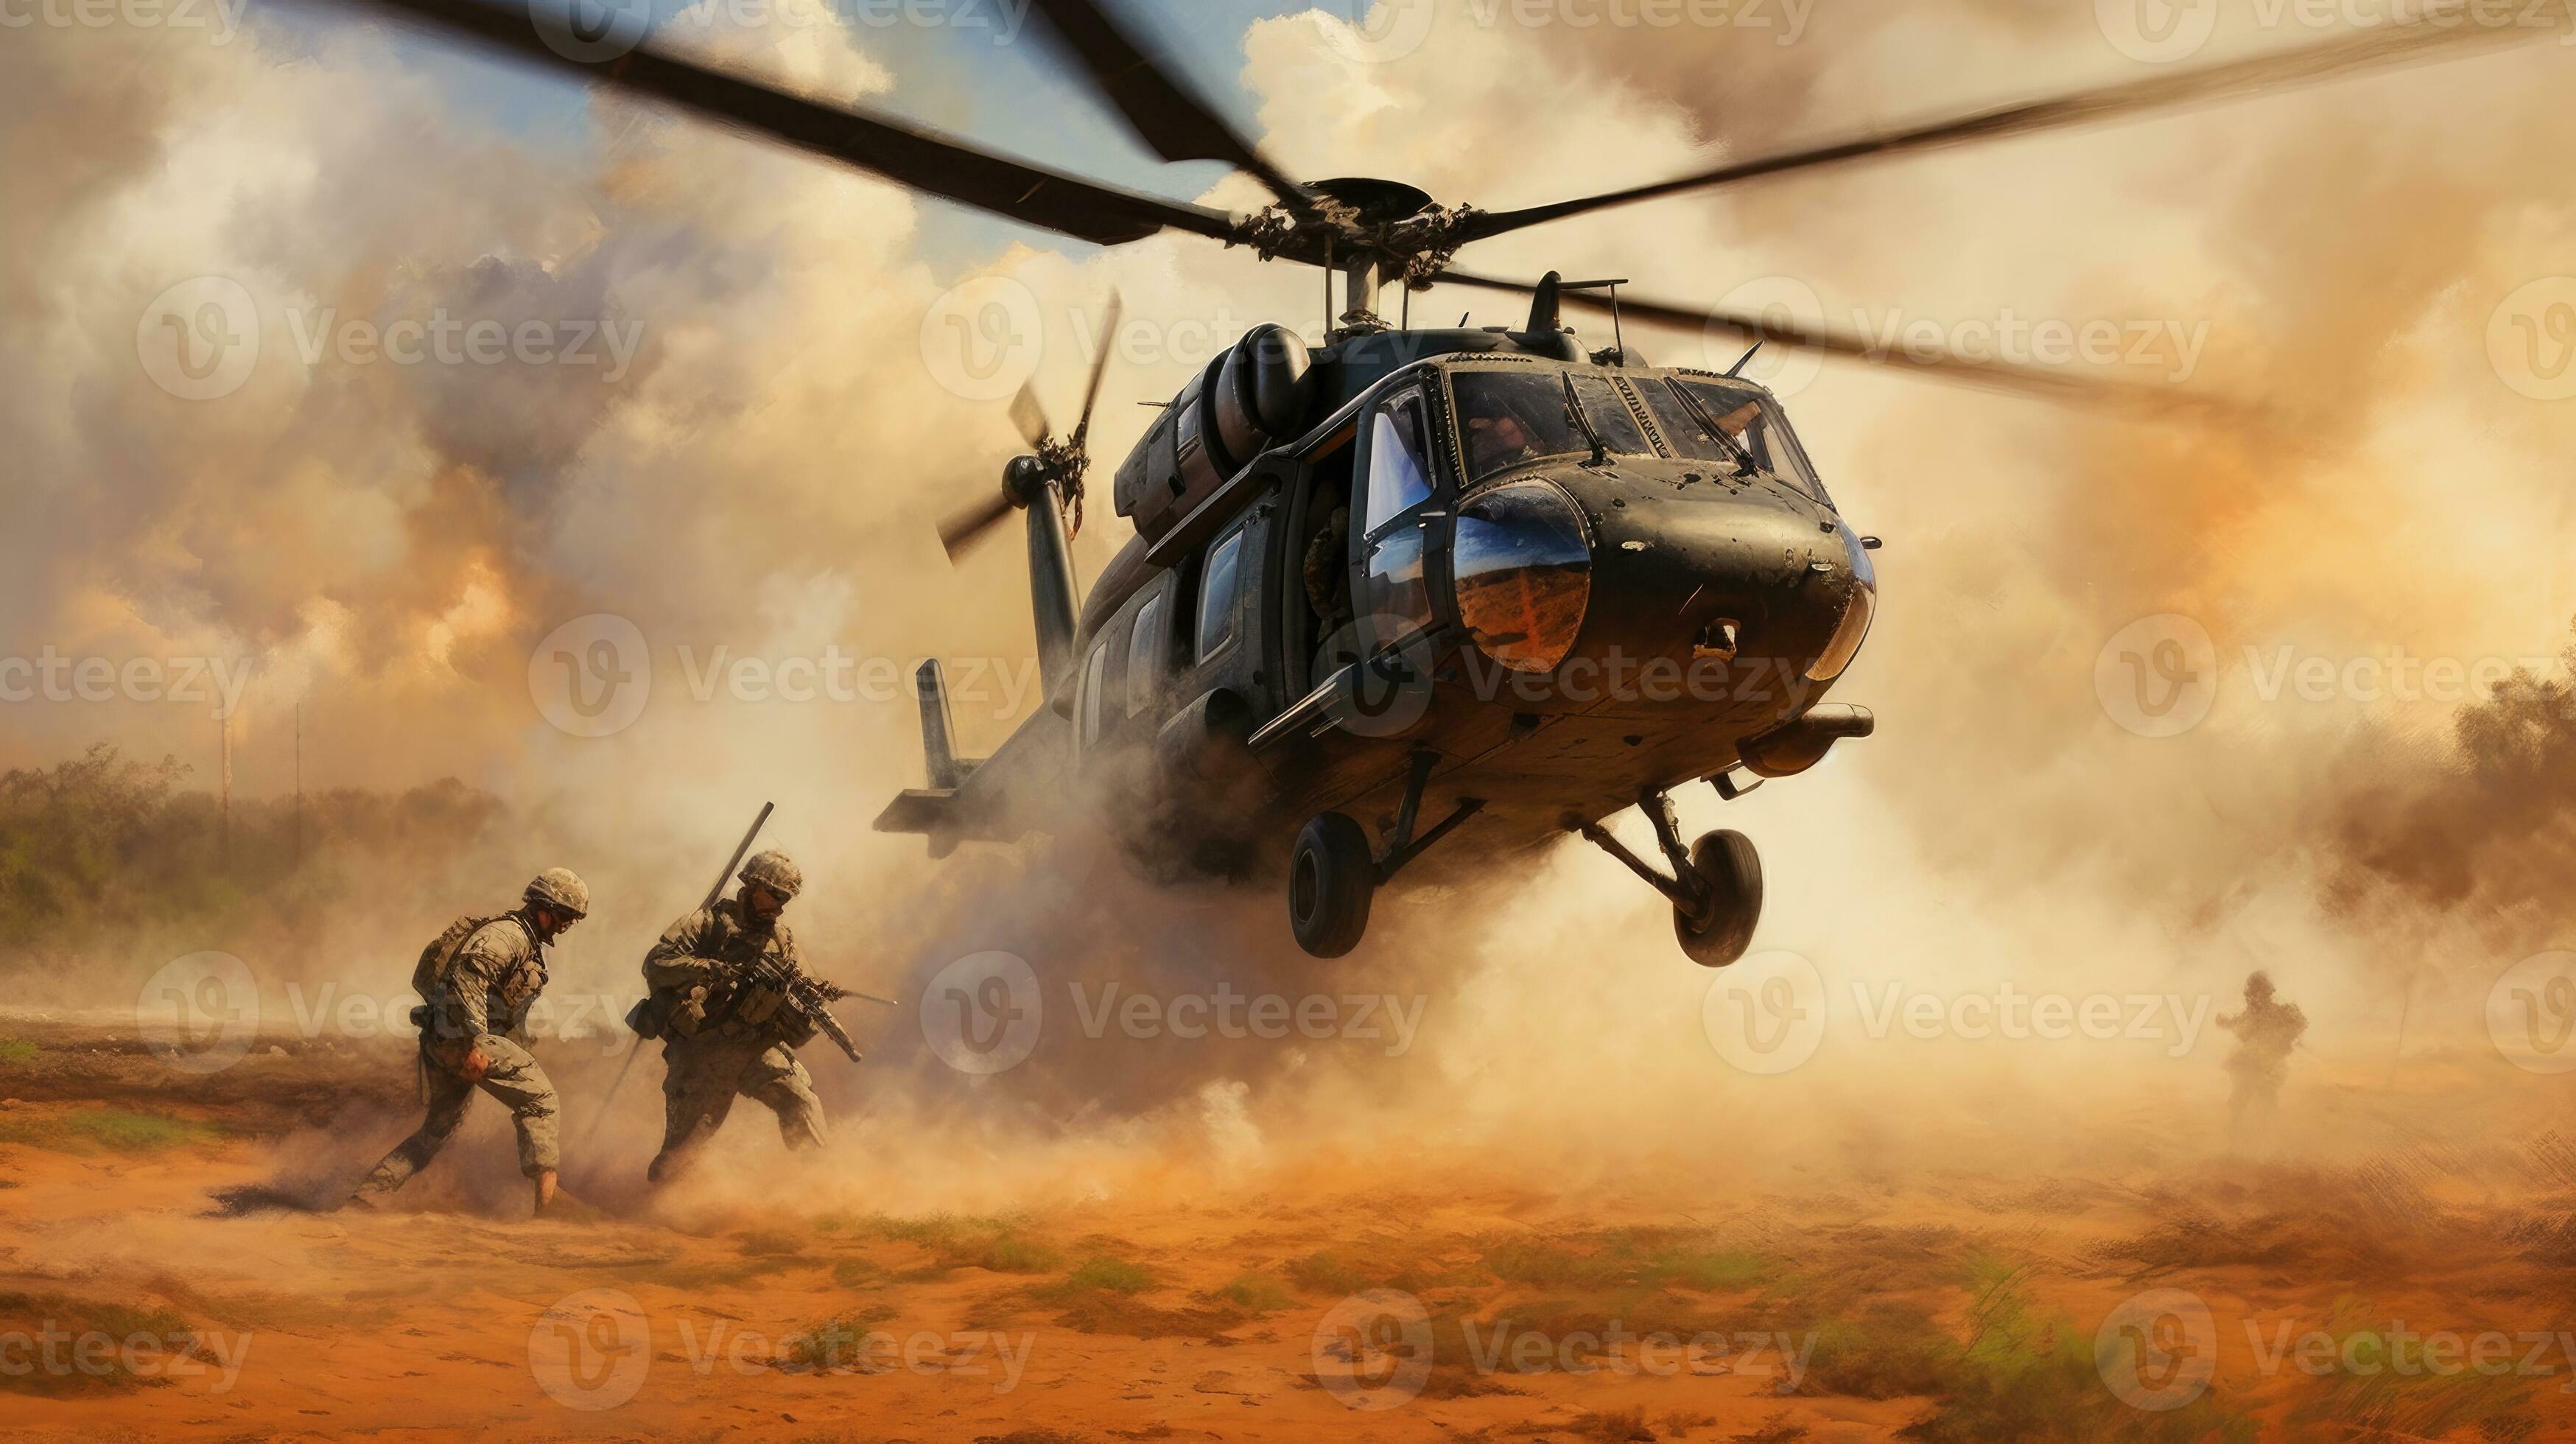 https://static.vecteezy.com/system/resources/previews/026/003/741/large_2x/a-military-helicopter-insertion-operation-soldiers-rappelling-down-ropes-from-the-helicopter-smoke-and-dust-from-the-landing-zone-in-the-background-photo.jpg